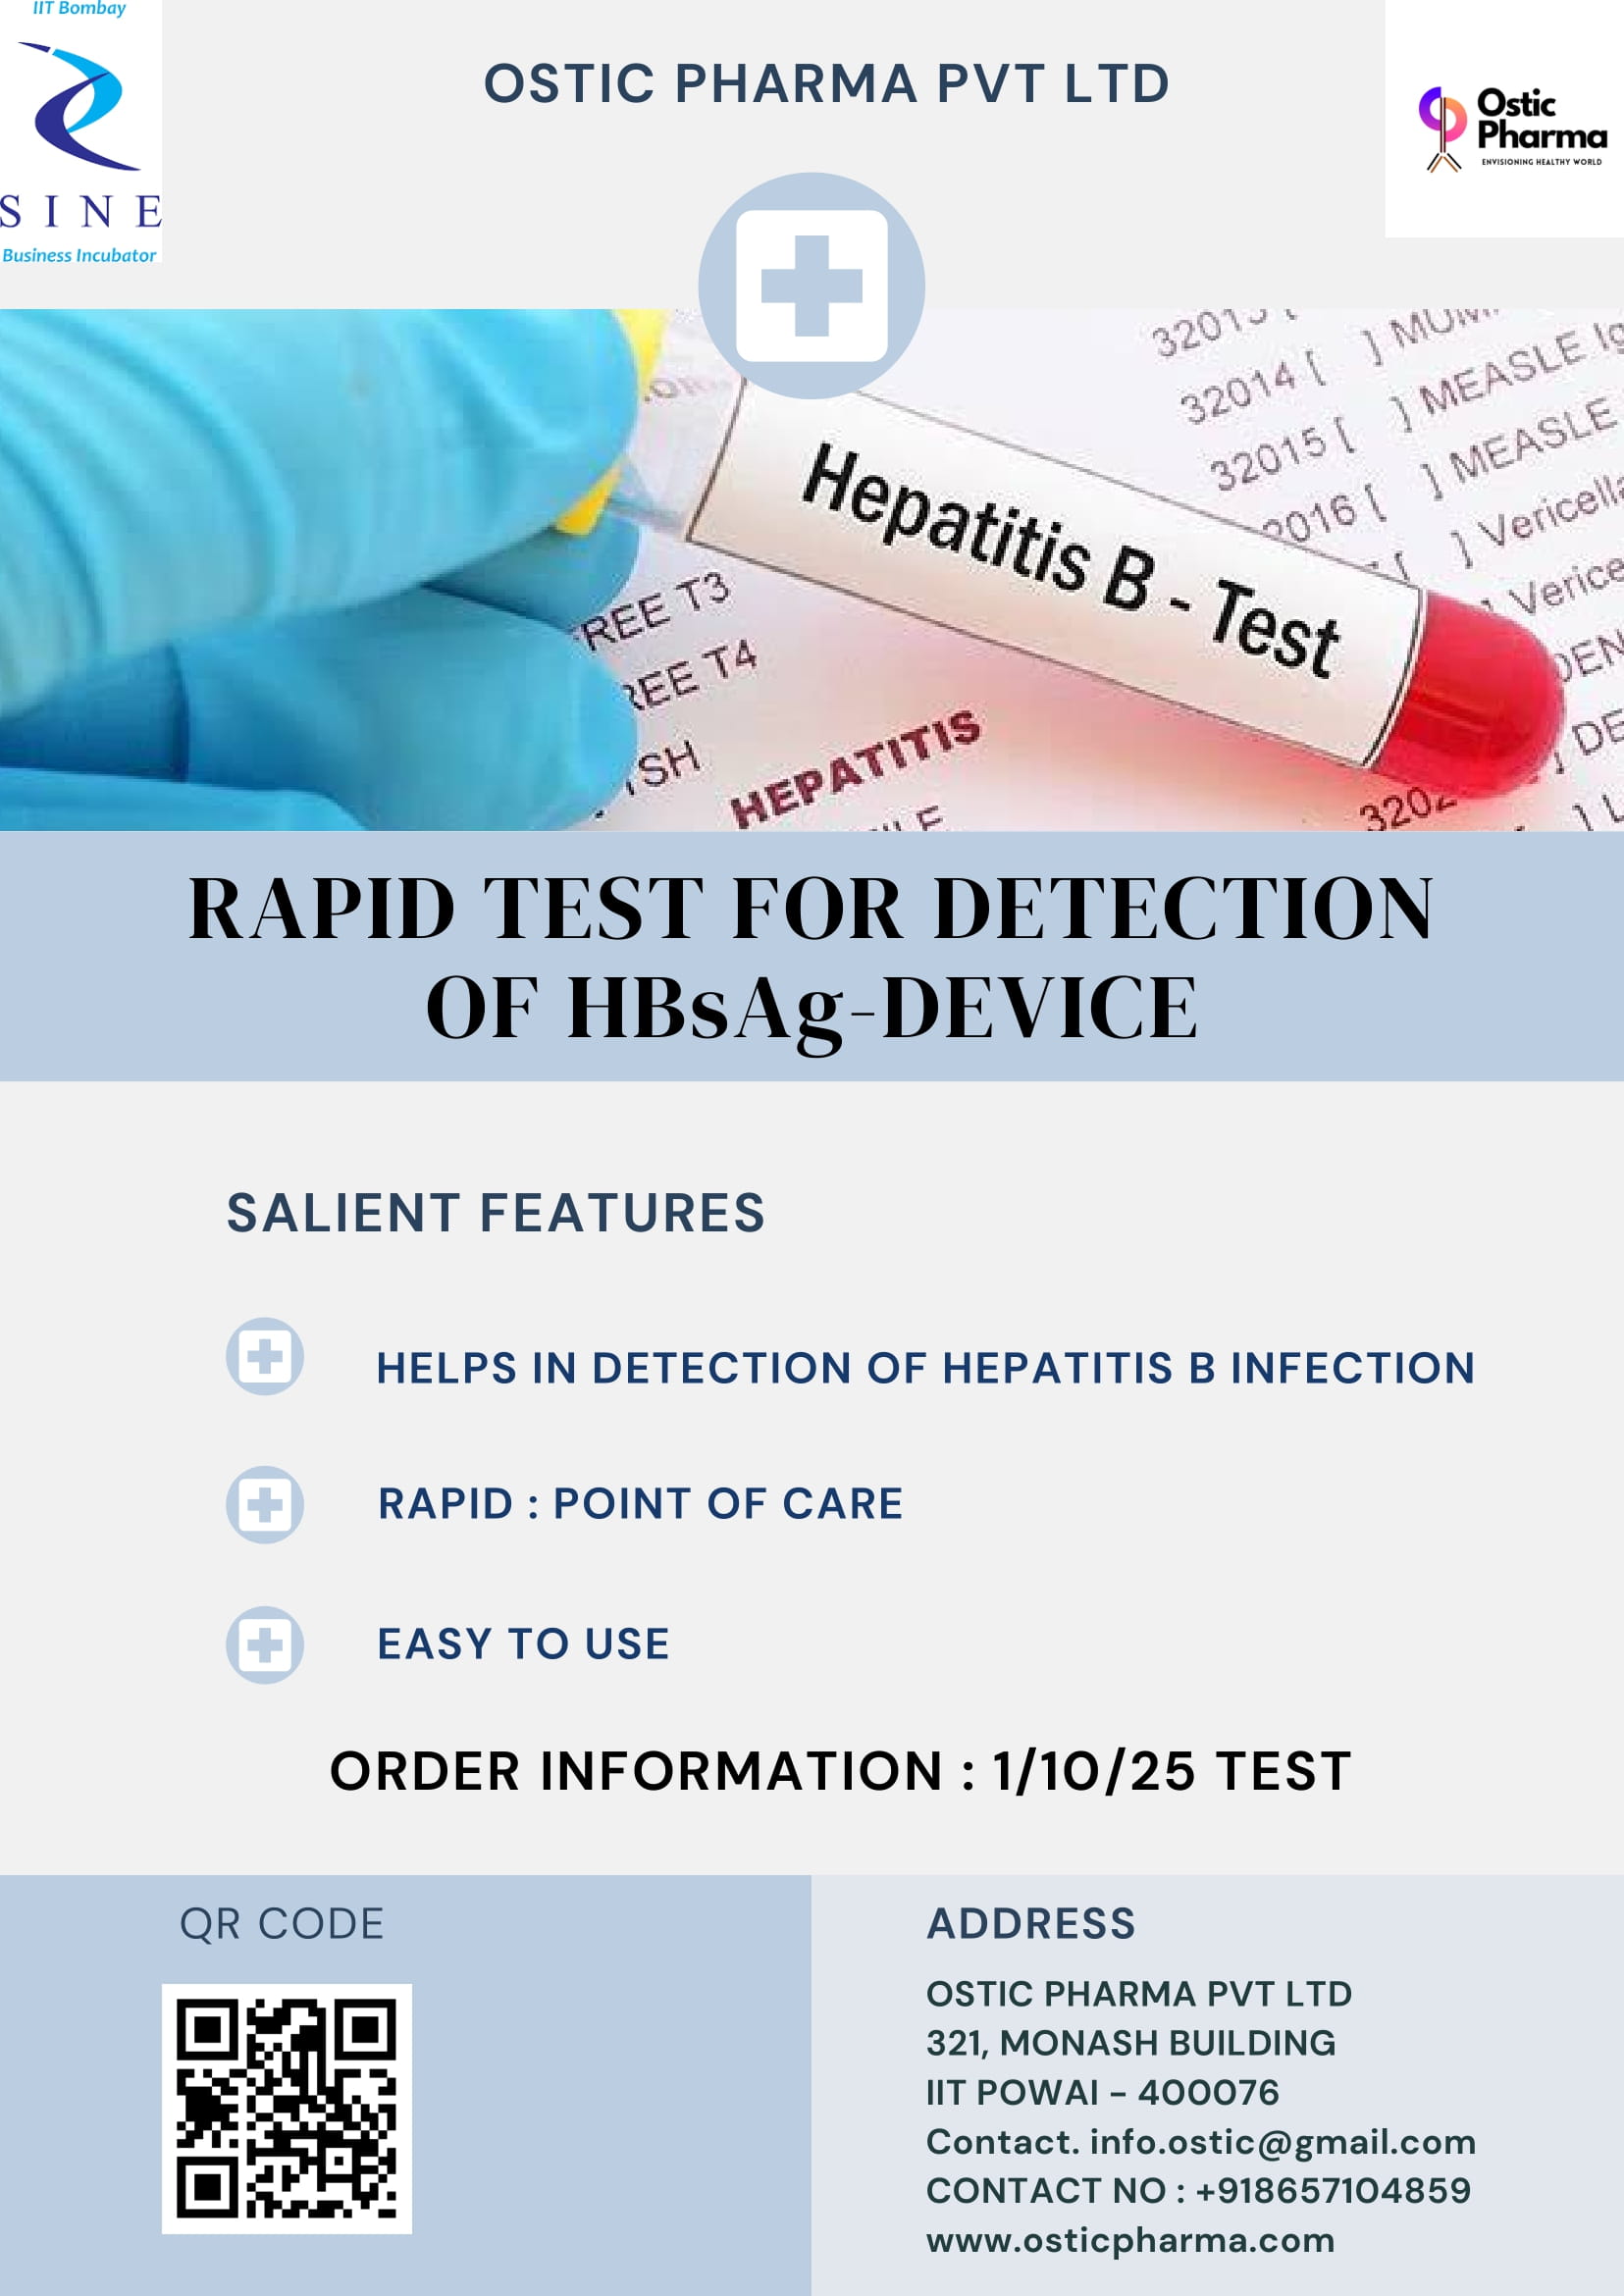 RAPID TEST FOR DETECTION OF HBsAg-DEVICE